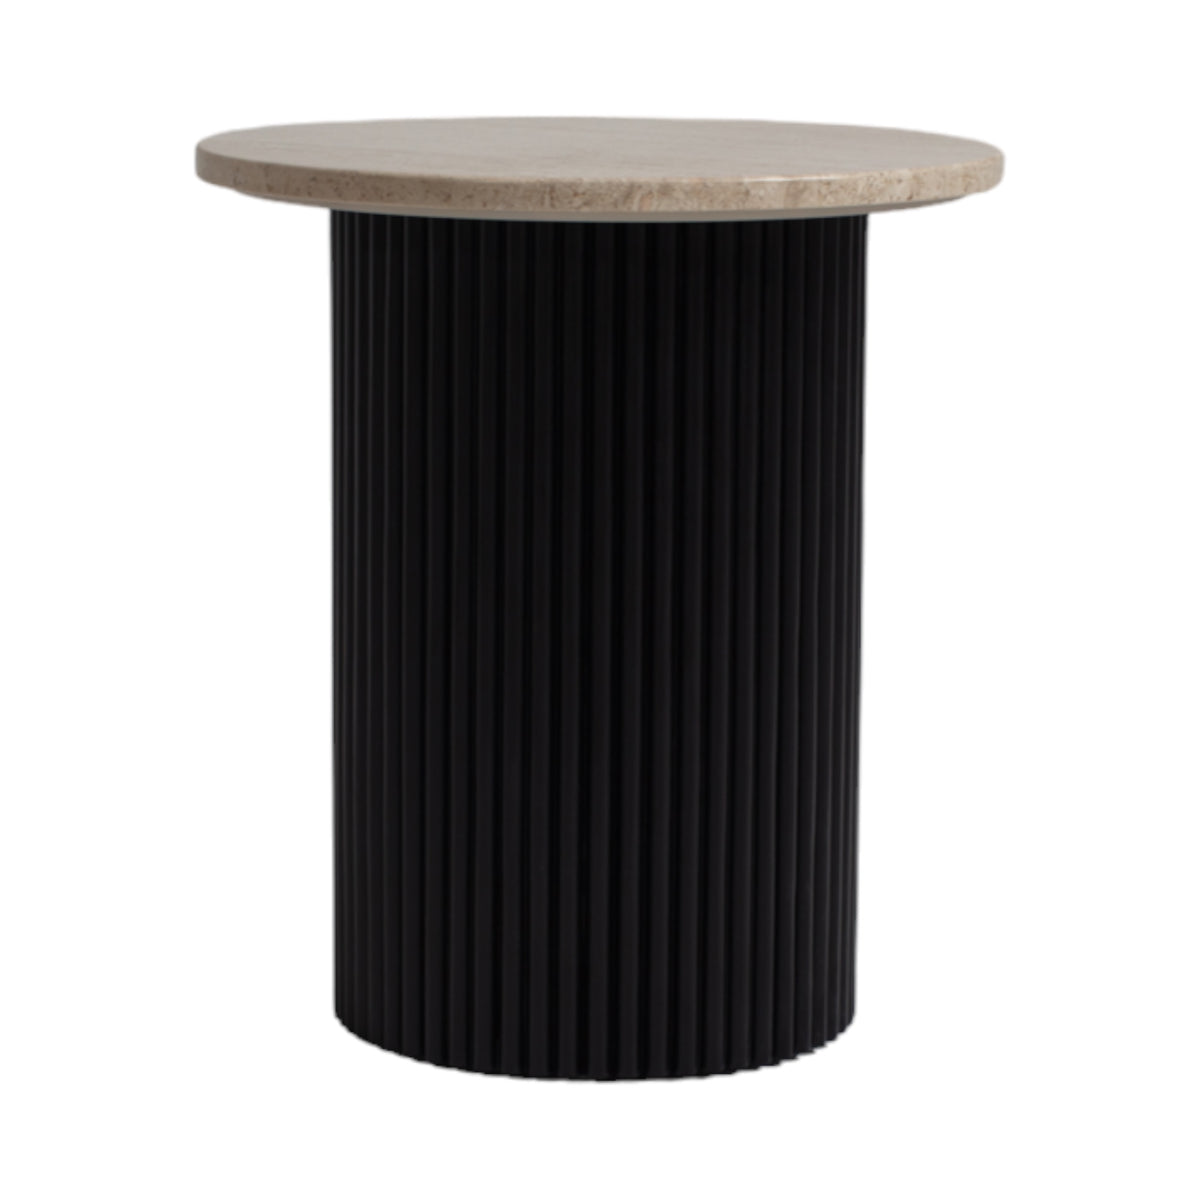 HAND MADE BLACK NORDIC DIANNA BEIGE MARBLE FLUTED SIDE TABLE